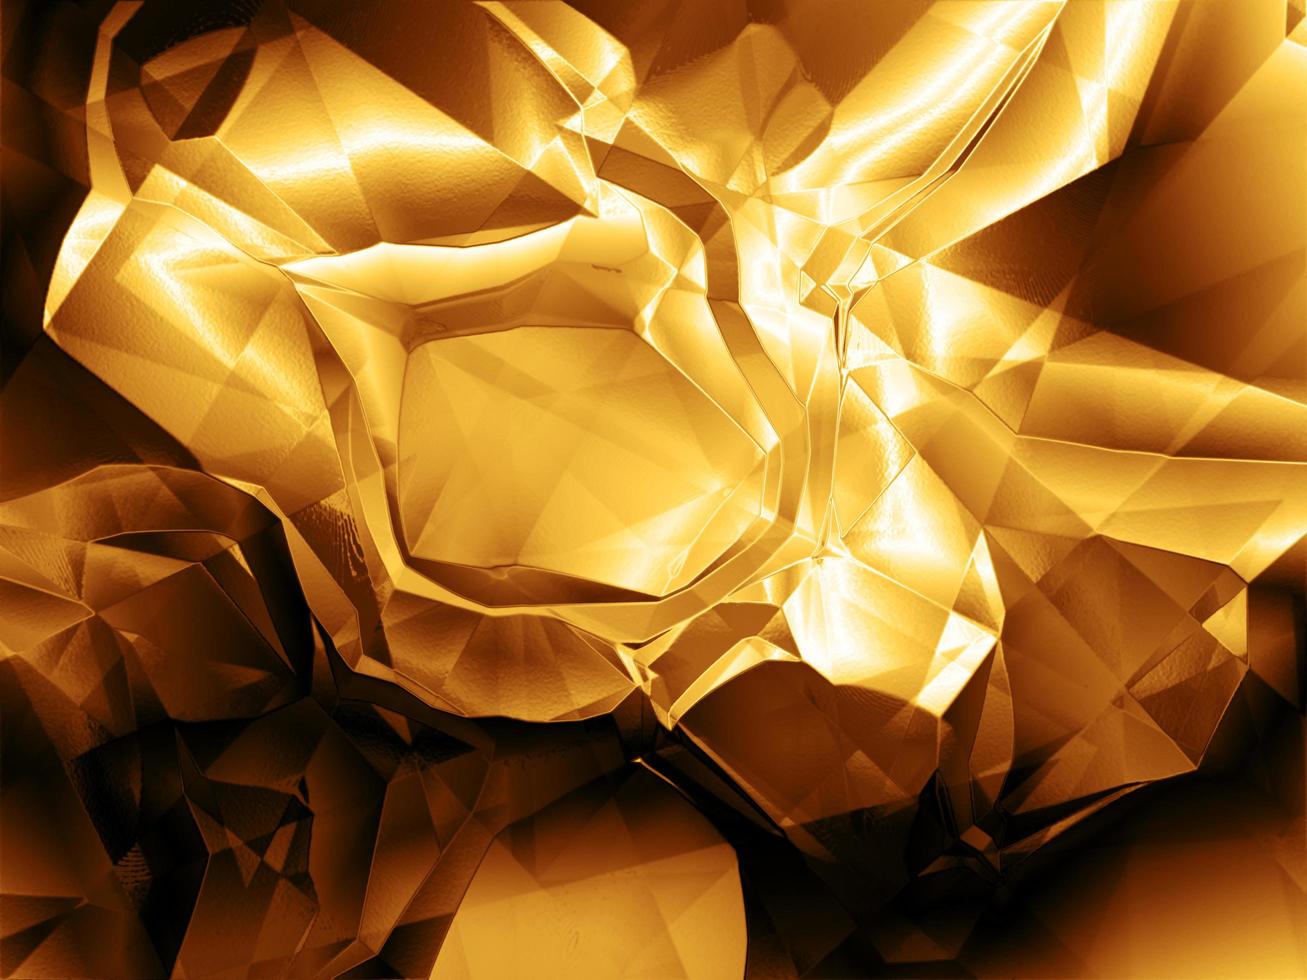 Gold nugget abstract modern background. Luxury crumpled paper texture design photo